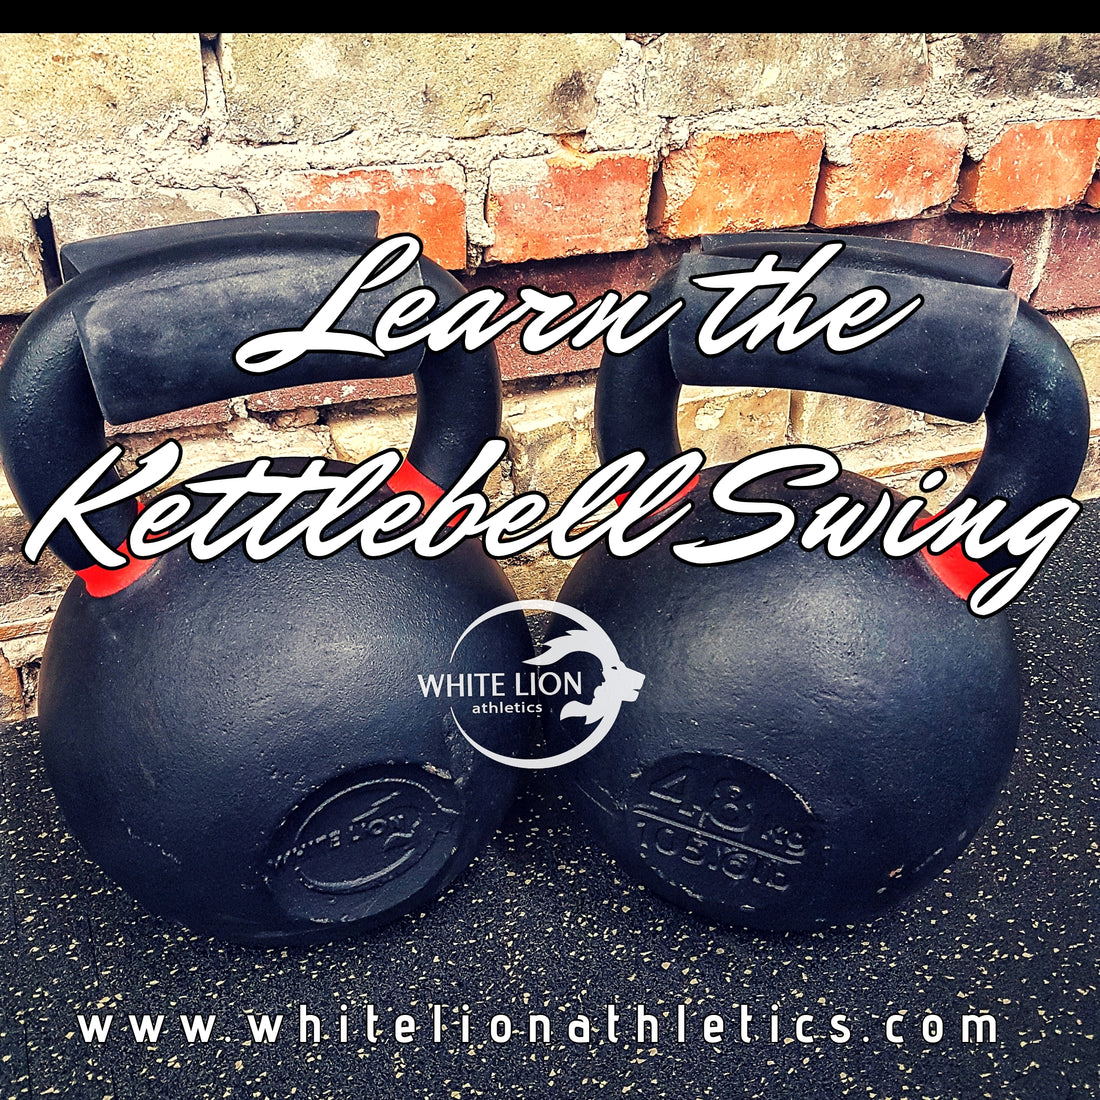 How to Use Kettlebells in Home Workouts.